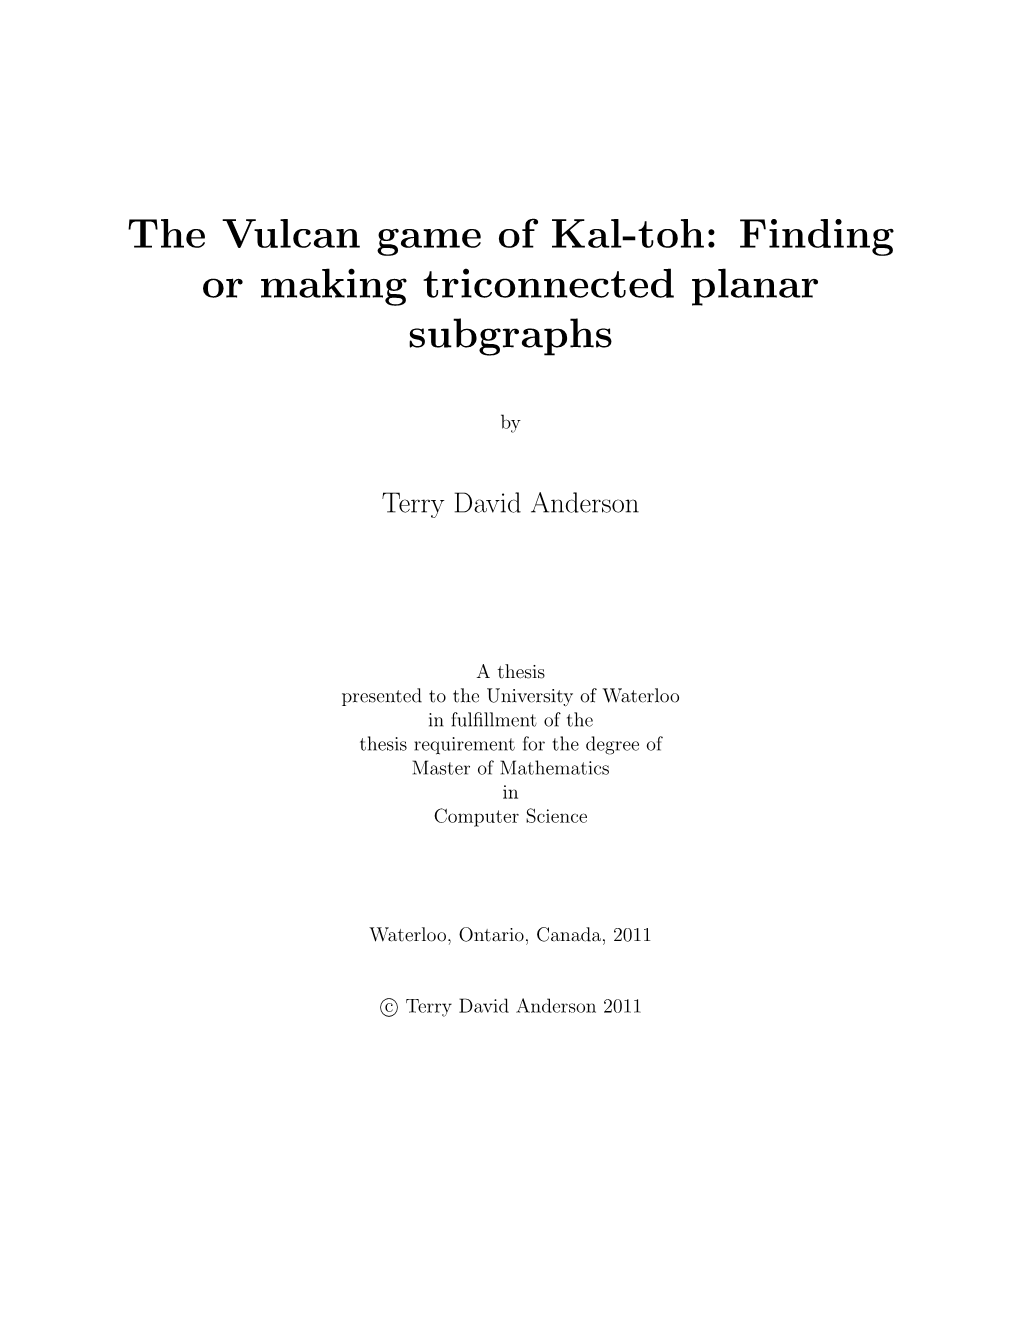 The Vulcan Game of Kal-Toh: Finding Or Making Triconnected Planar Subgraphs